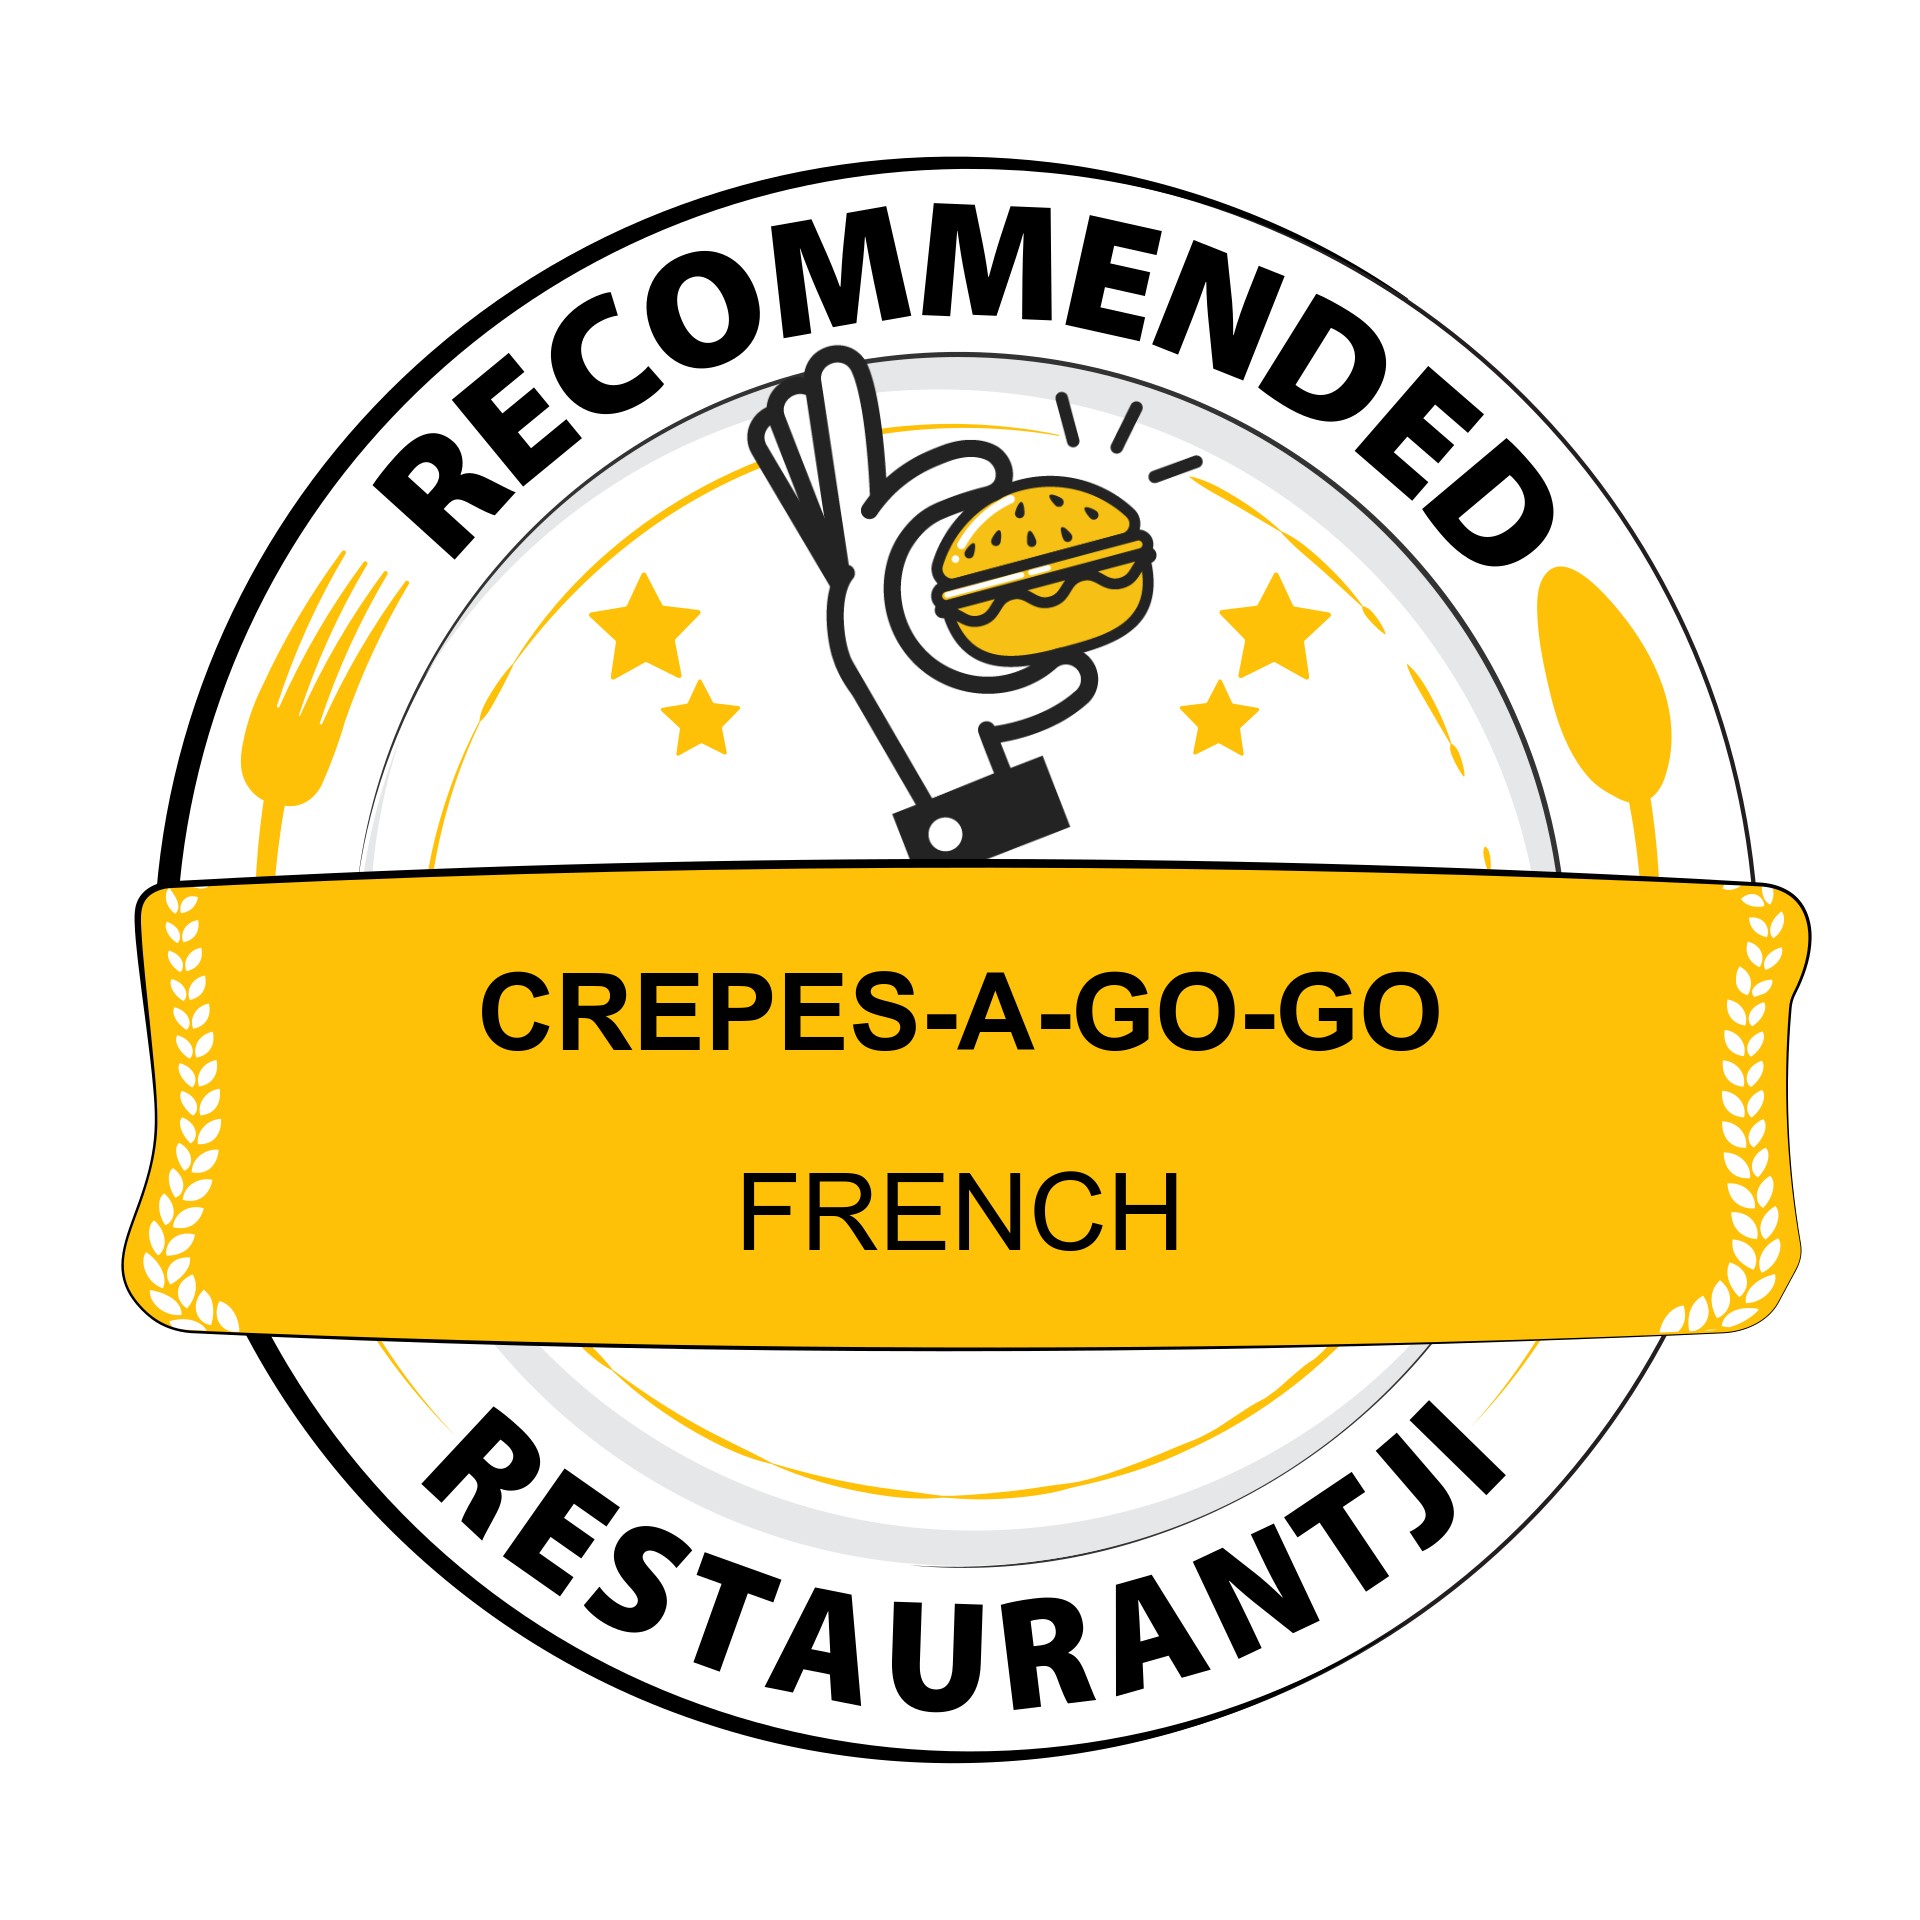 Crepes-a-Go-Go is a standout choice on Restaurantji - your source for the latest reviews, menus, and photos of local restaurants.